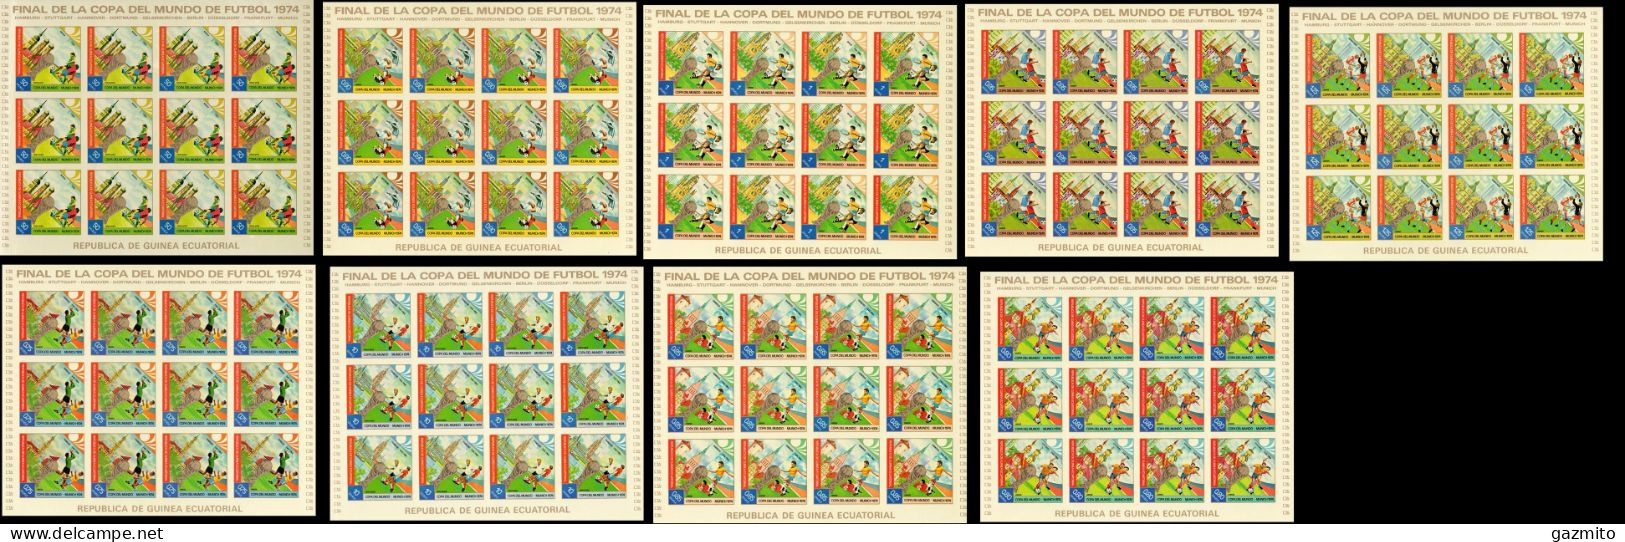 Guinea Equat. 1974, Football World Cup In Germany, 9sheetlets IMPERFORATED - Äquatorial-Guinea